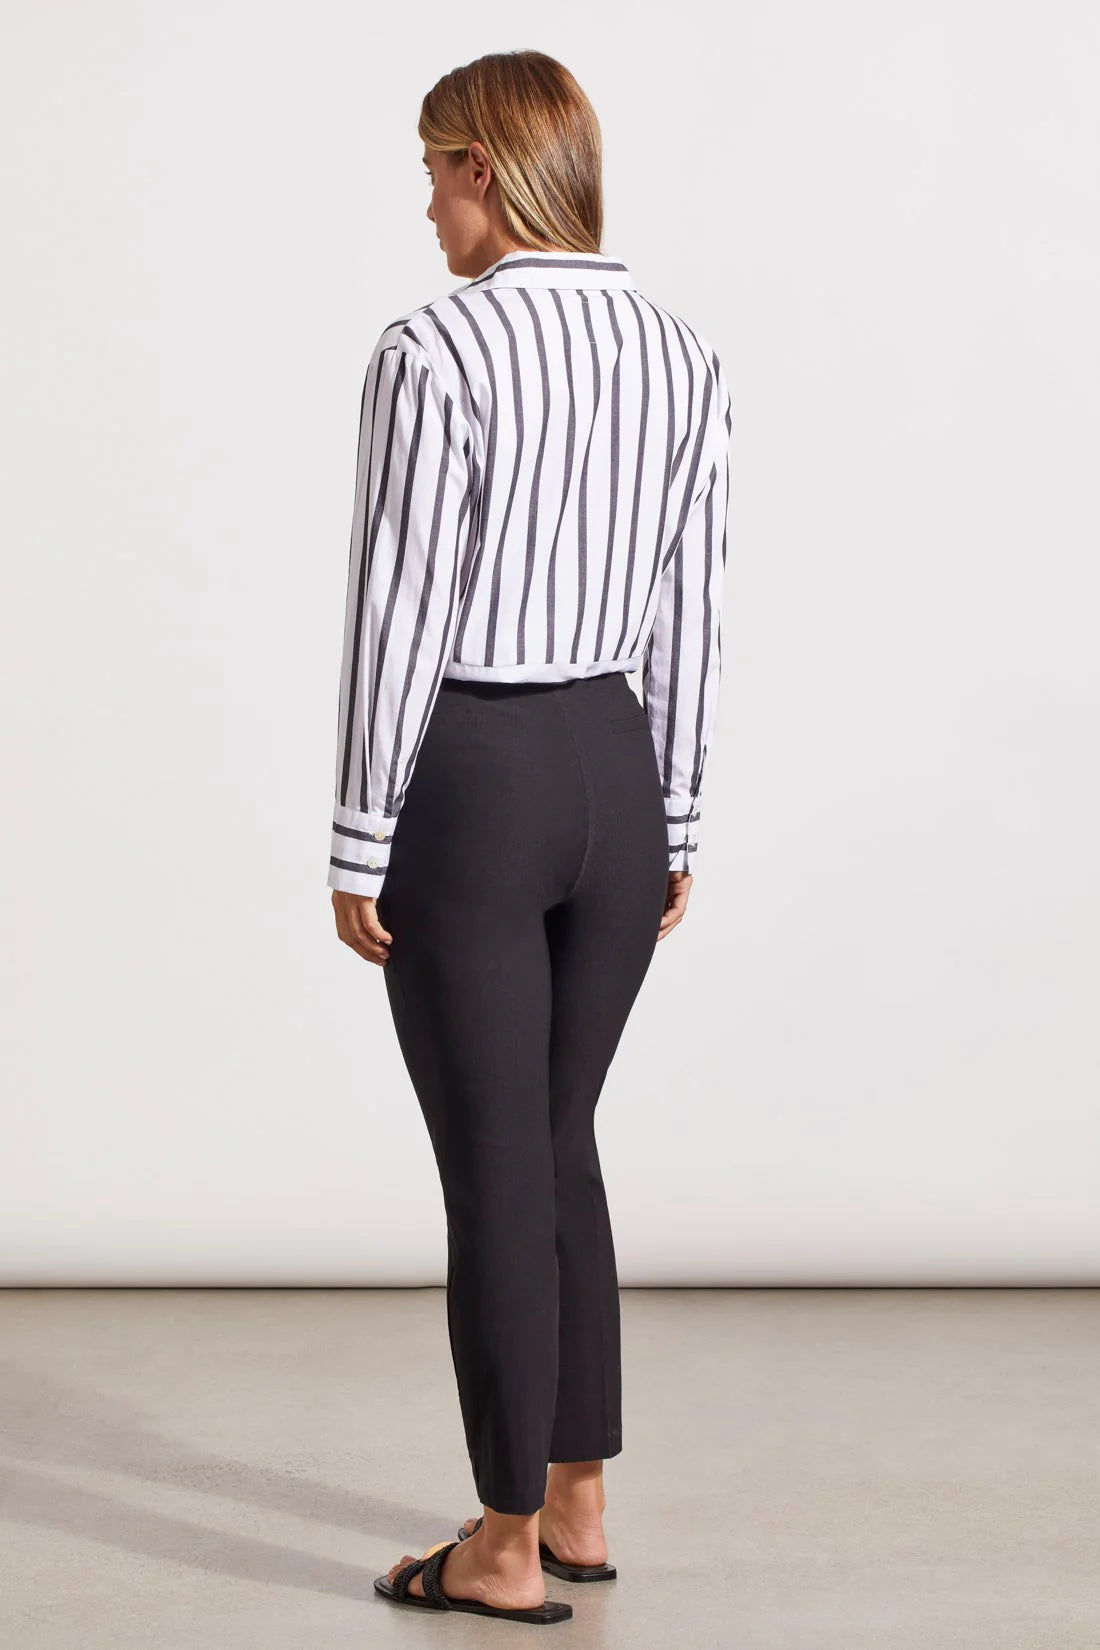 Get ready to move with ease and elegance courtesy of these pull-on ankle pants.